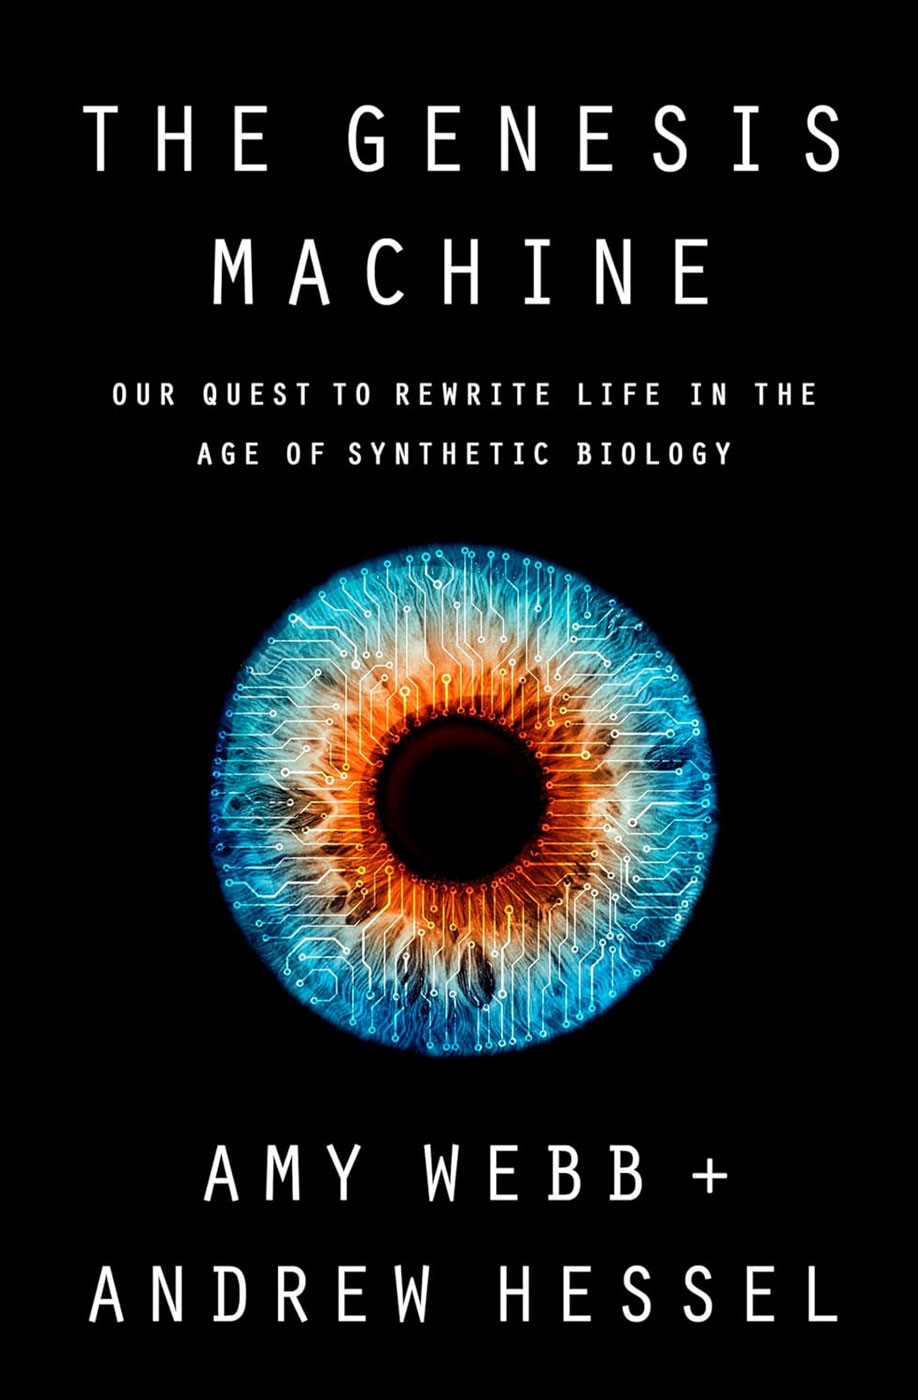 The Genesis Machine: Our Quest to Rewrite Life in the Age of Synthetic Biology, by Amy Webb and Andrew Hessel, 2022